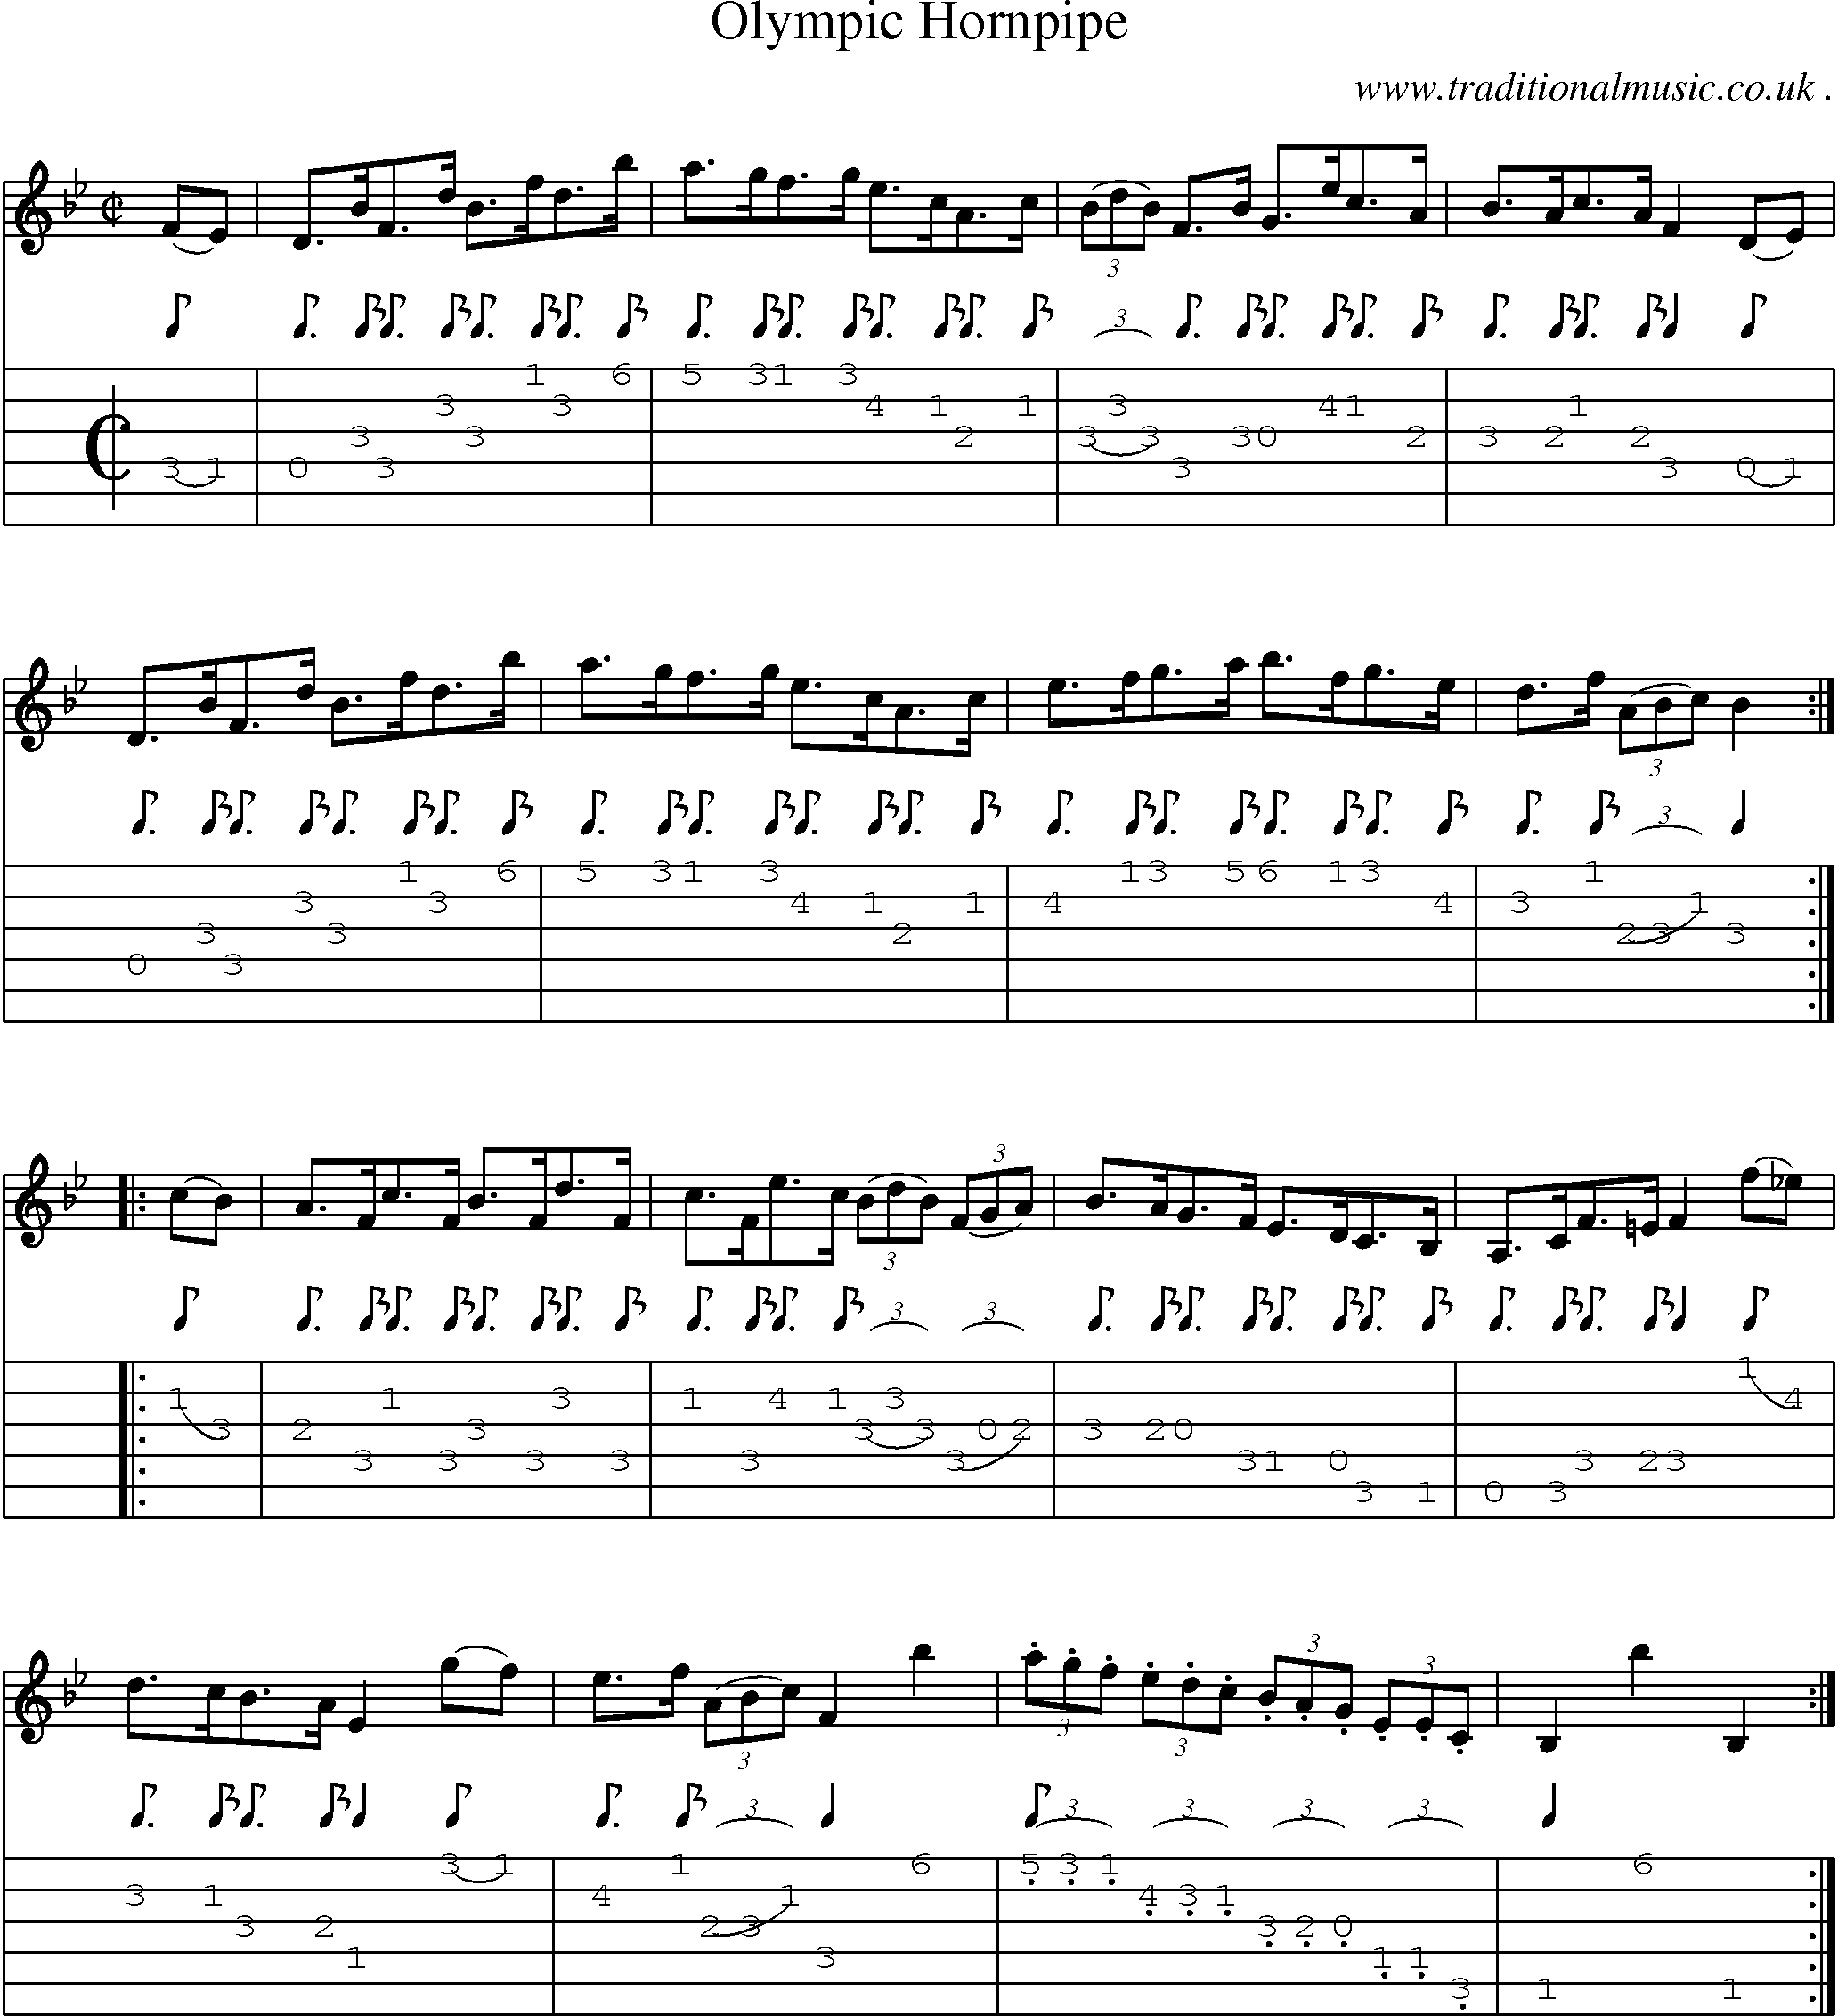 Sheet-Music and Guitar Tabs for Olympic Hornpipe